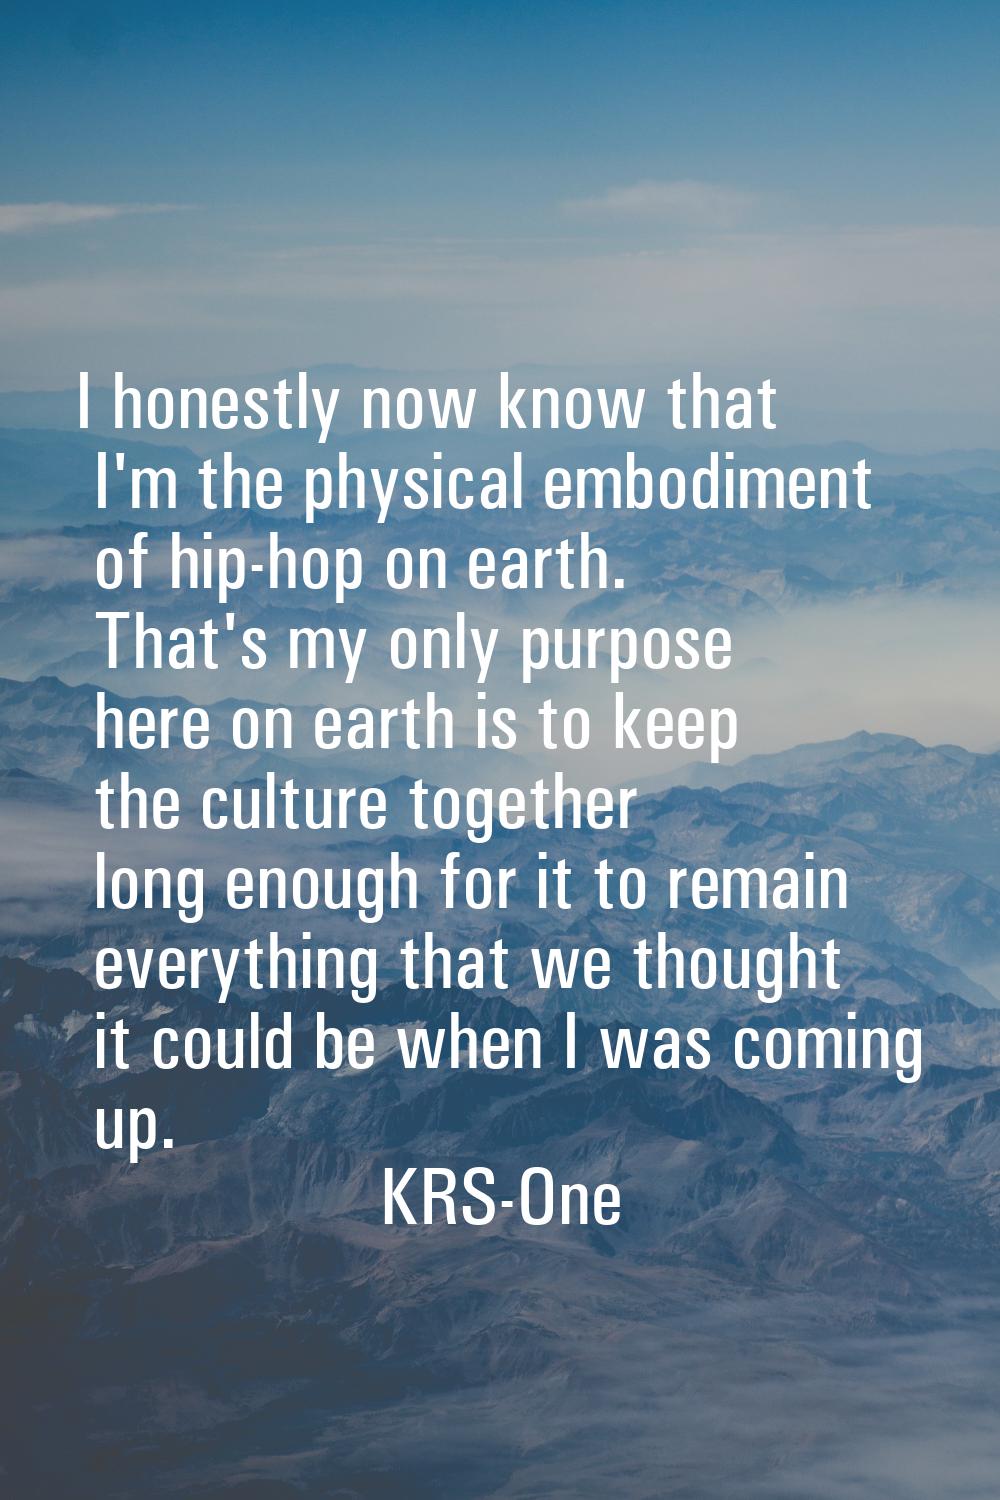 I honestly now know that I'm the physical embodiment of hip-hop on earth. That's my only purpose he